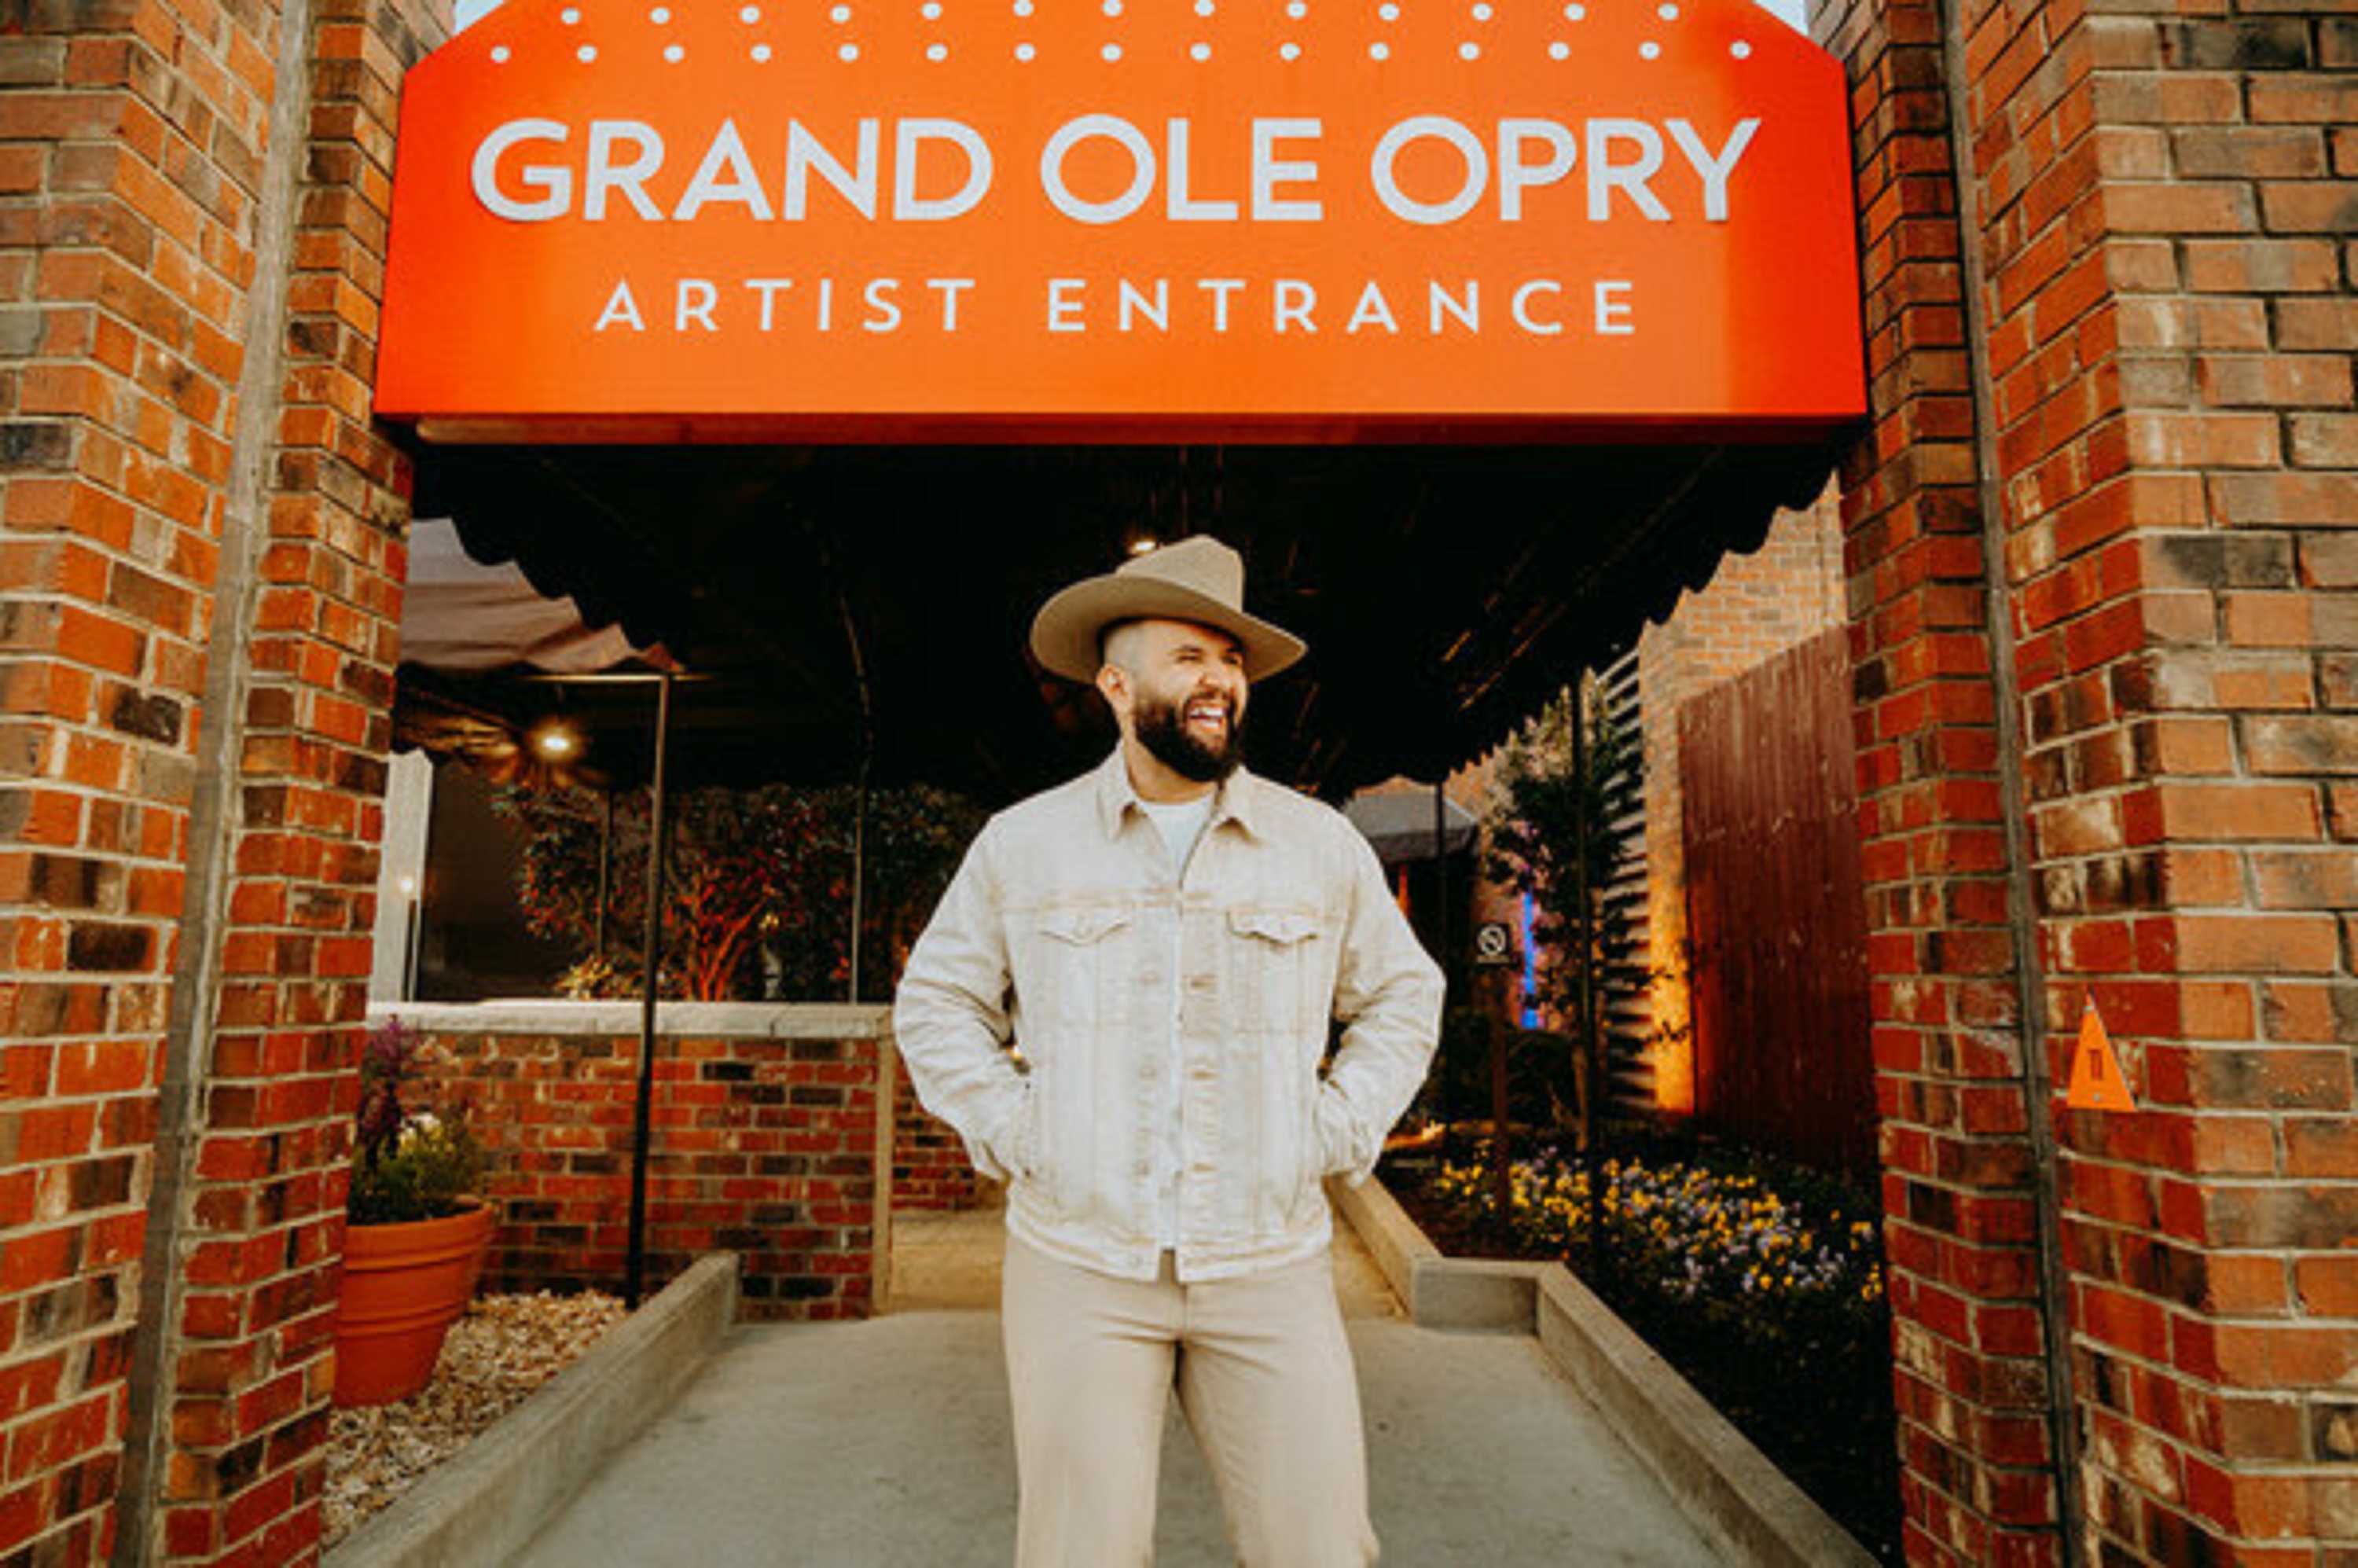 Carin León's "My Opry Debut" video celebrating his milestone Grand Ole Opry performance out now